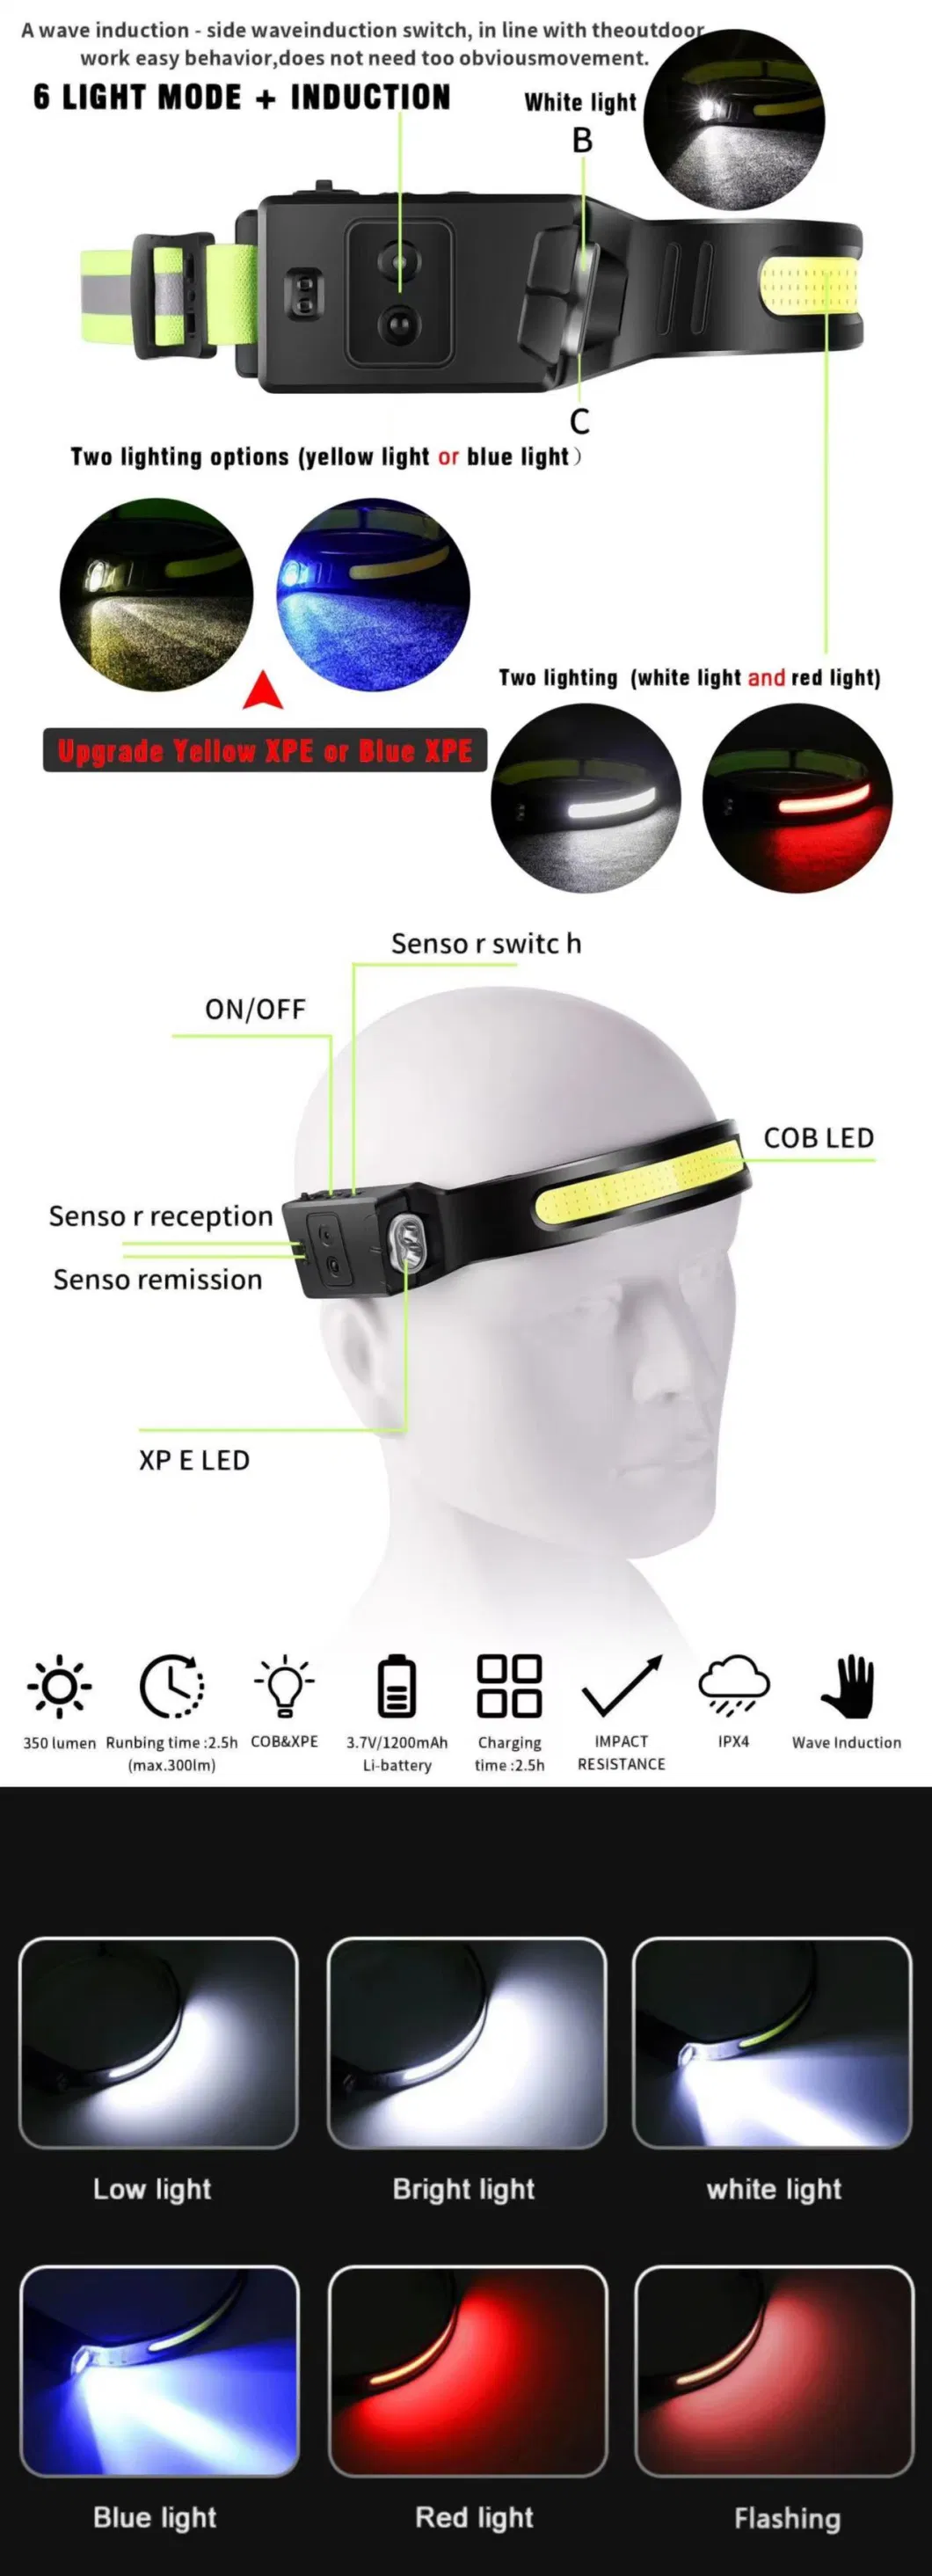 Head Torch Chargeable Band Induction Head Lamp COB Fishing Running Headlamp